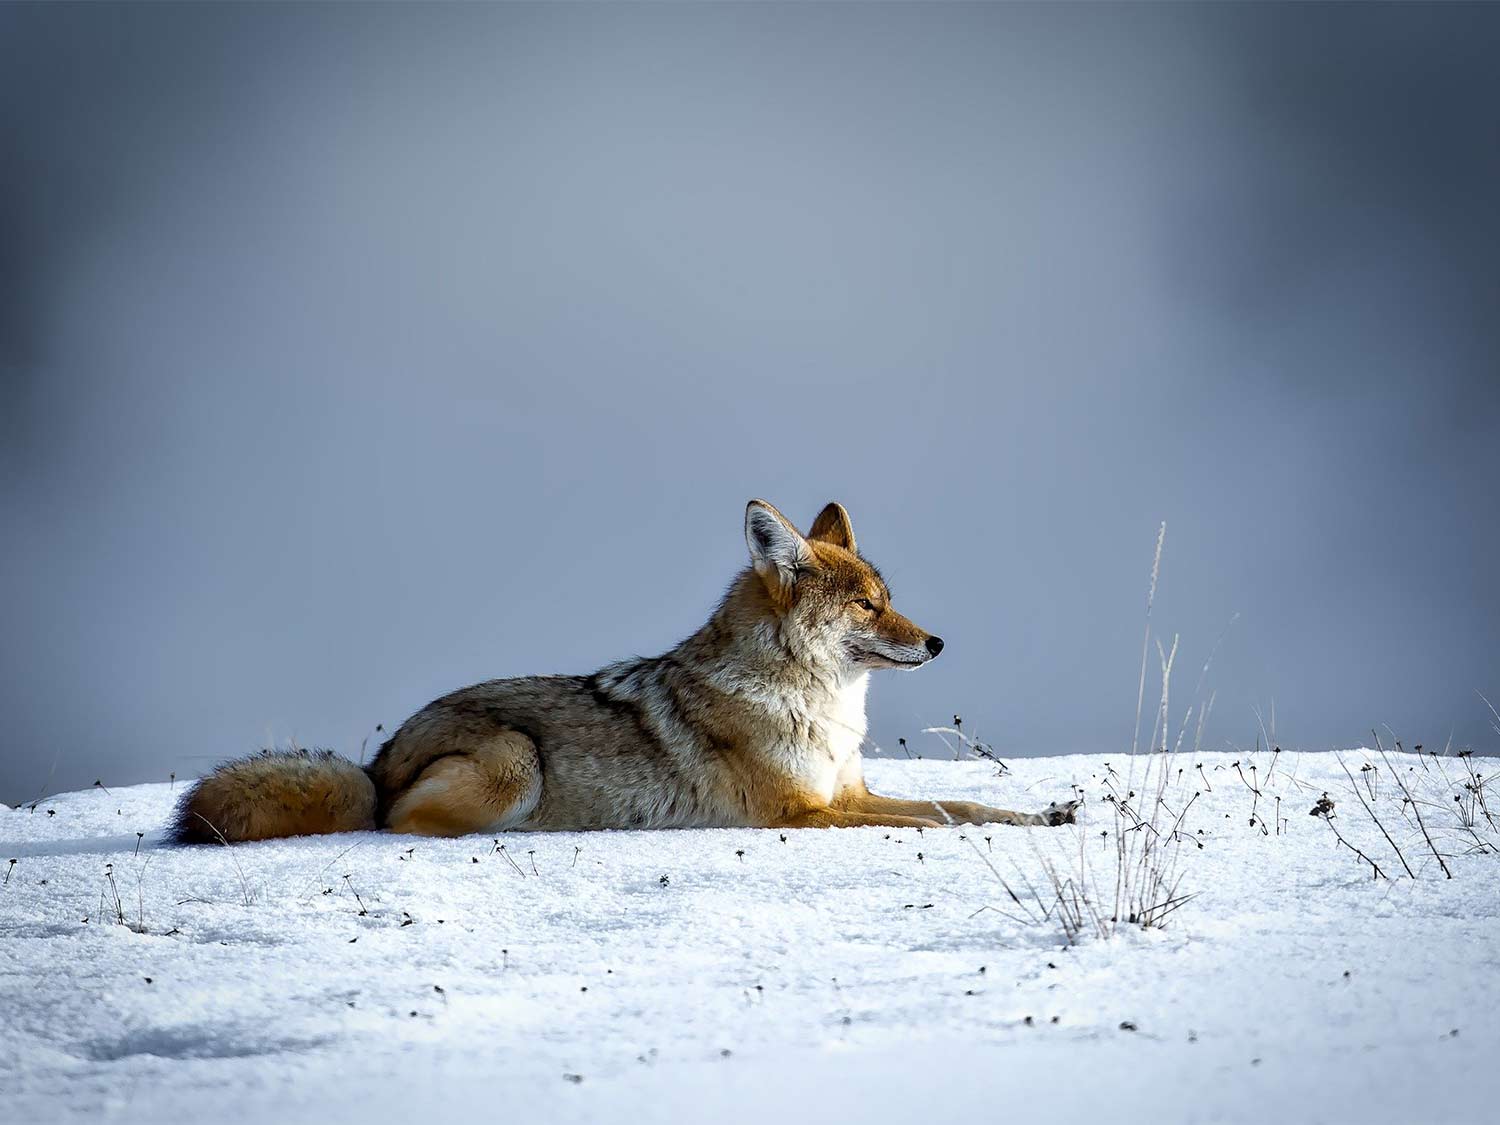 A coyote in the snow.